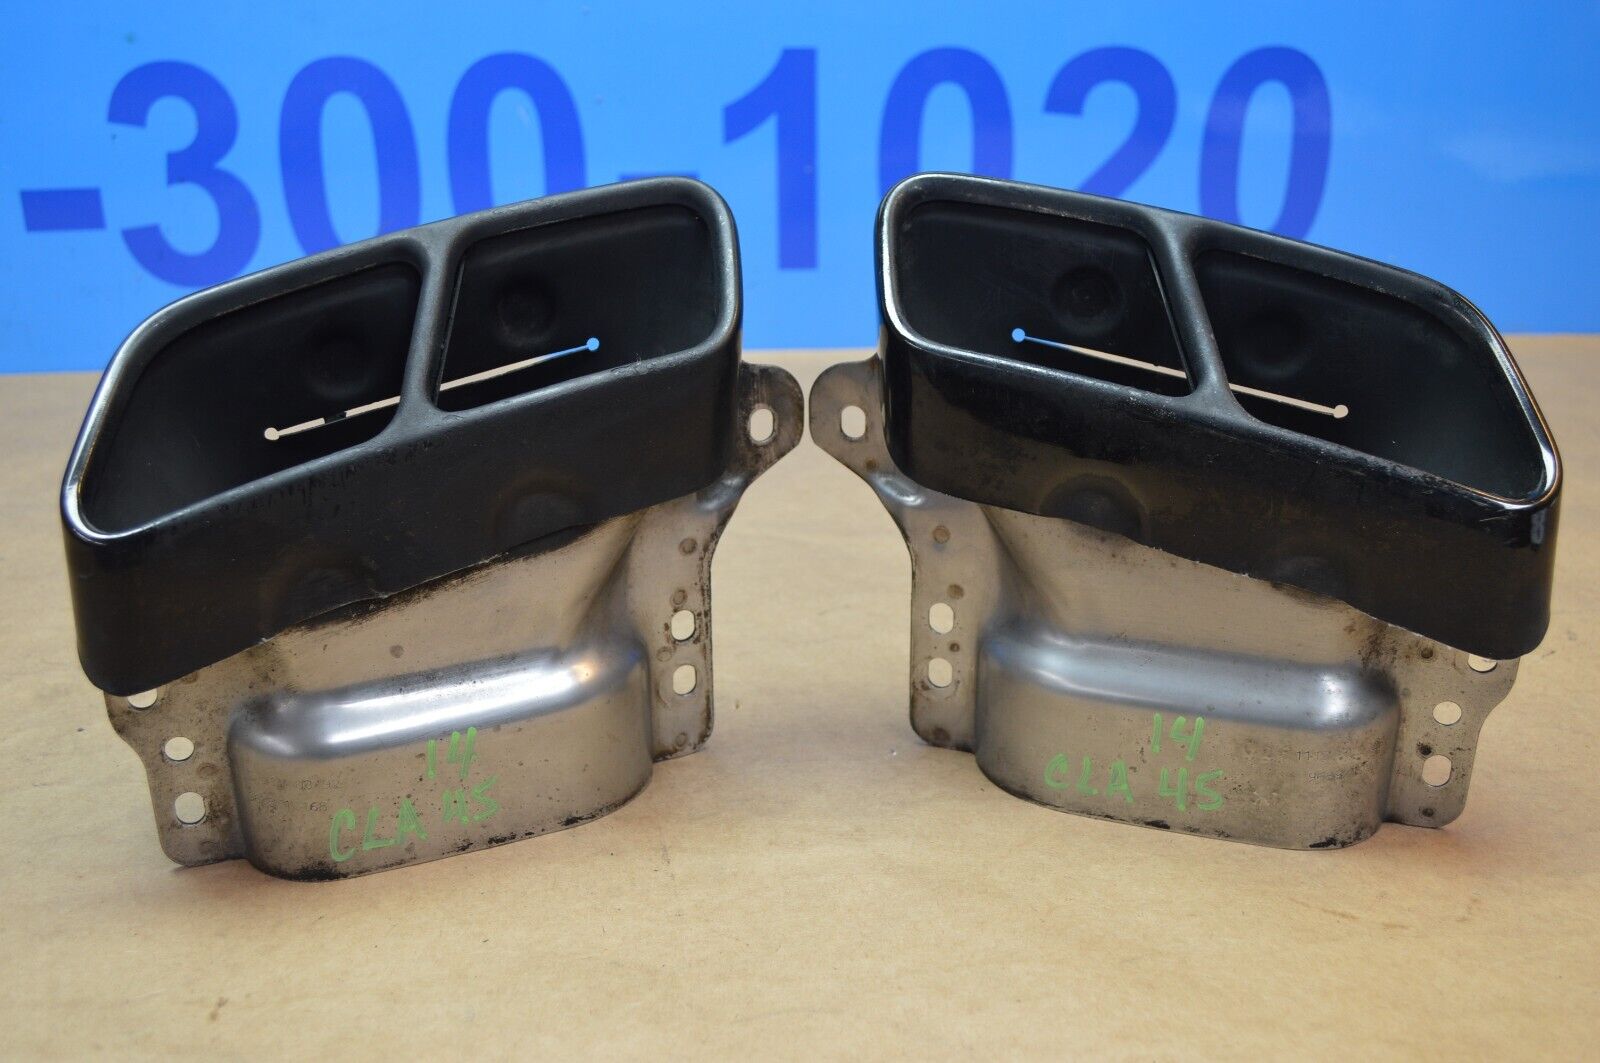 2014 W117 MERCEDES BENZ CLA45 AMG EXHAUST MUFFLER PIPE TIP TIPS LEFT & RIGHT